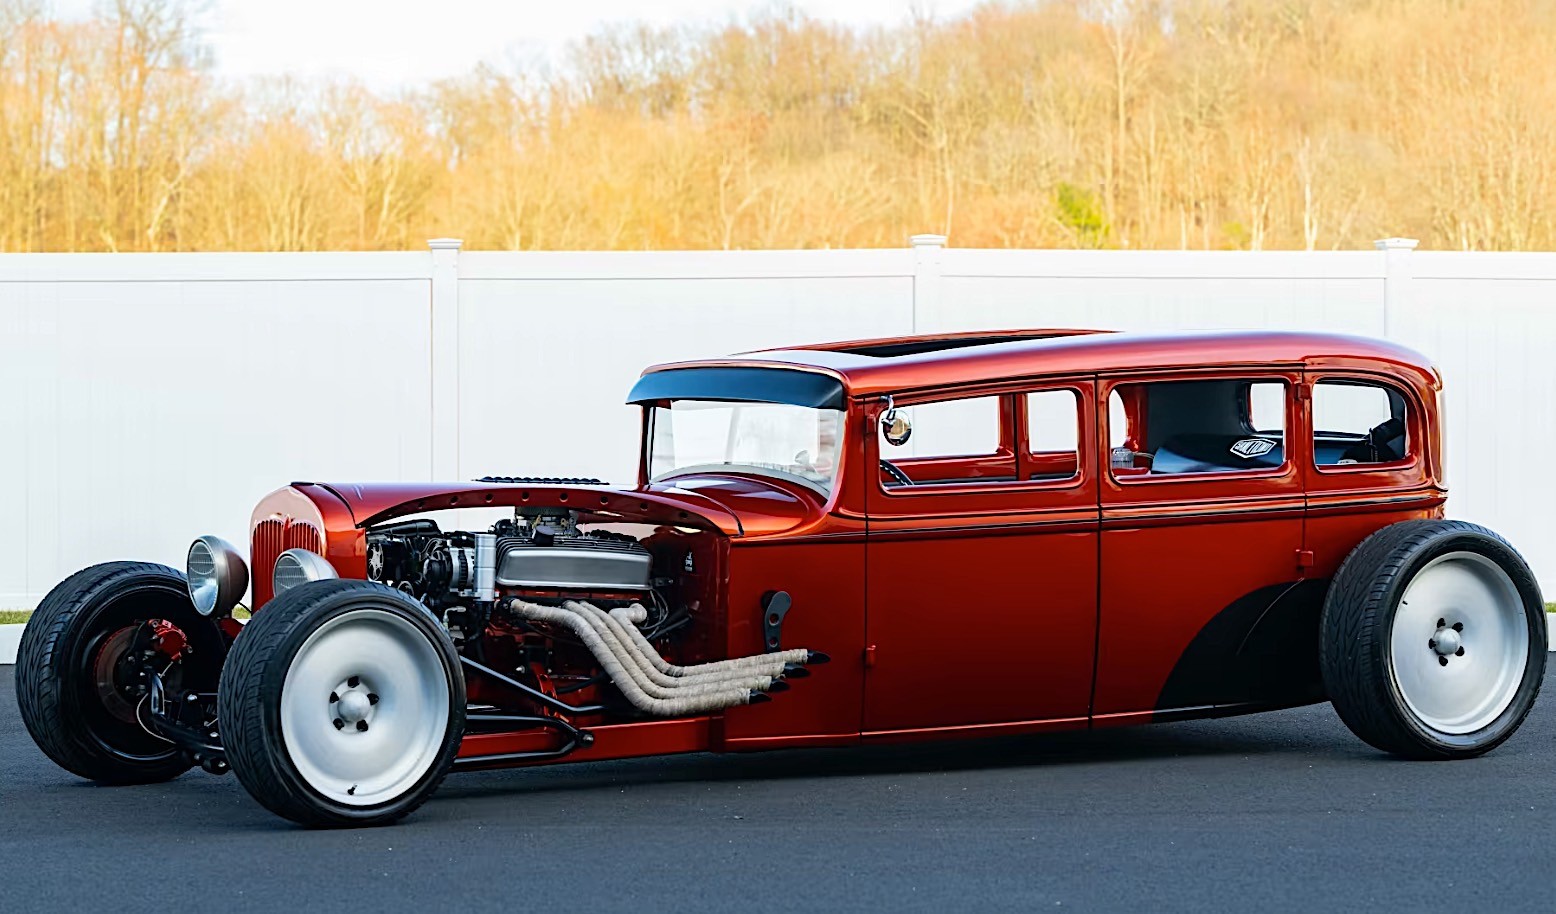 Once a Rust Bucket, This 1947 Hudson Super Six Is Now a HEMI-Powered Beauty  - autoevolution